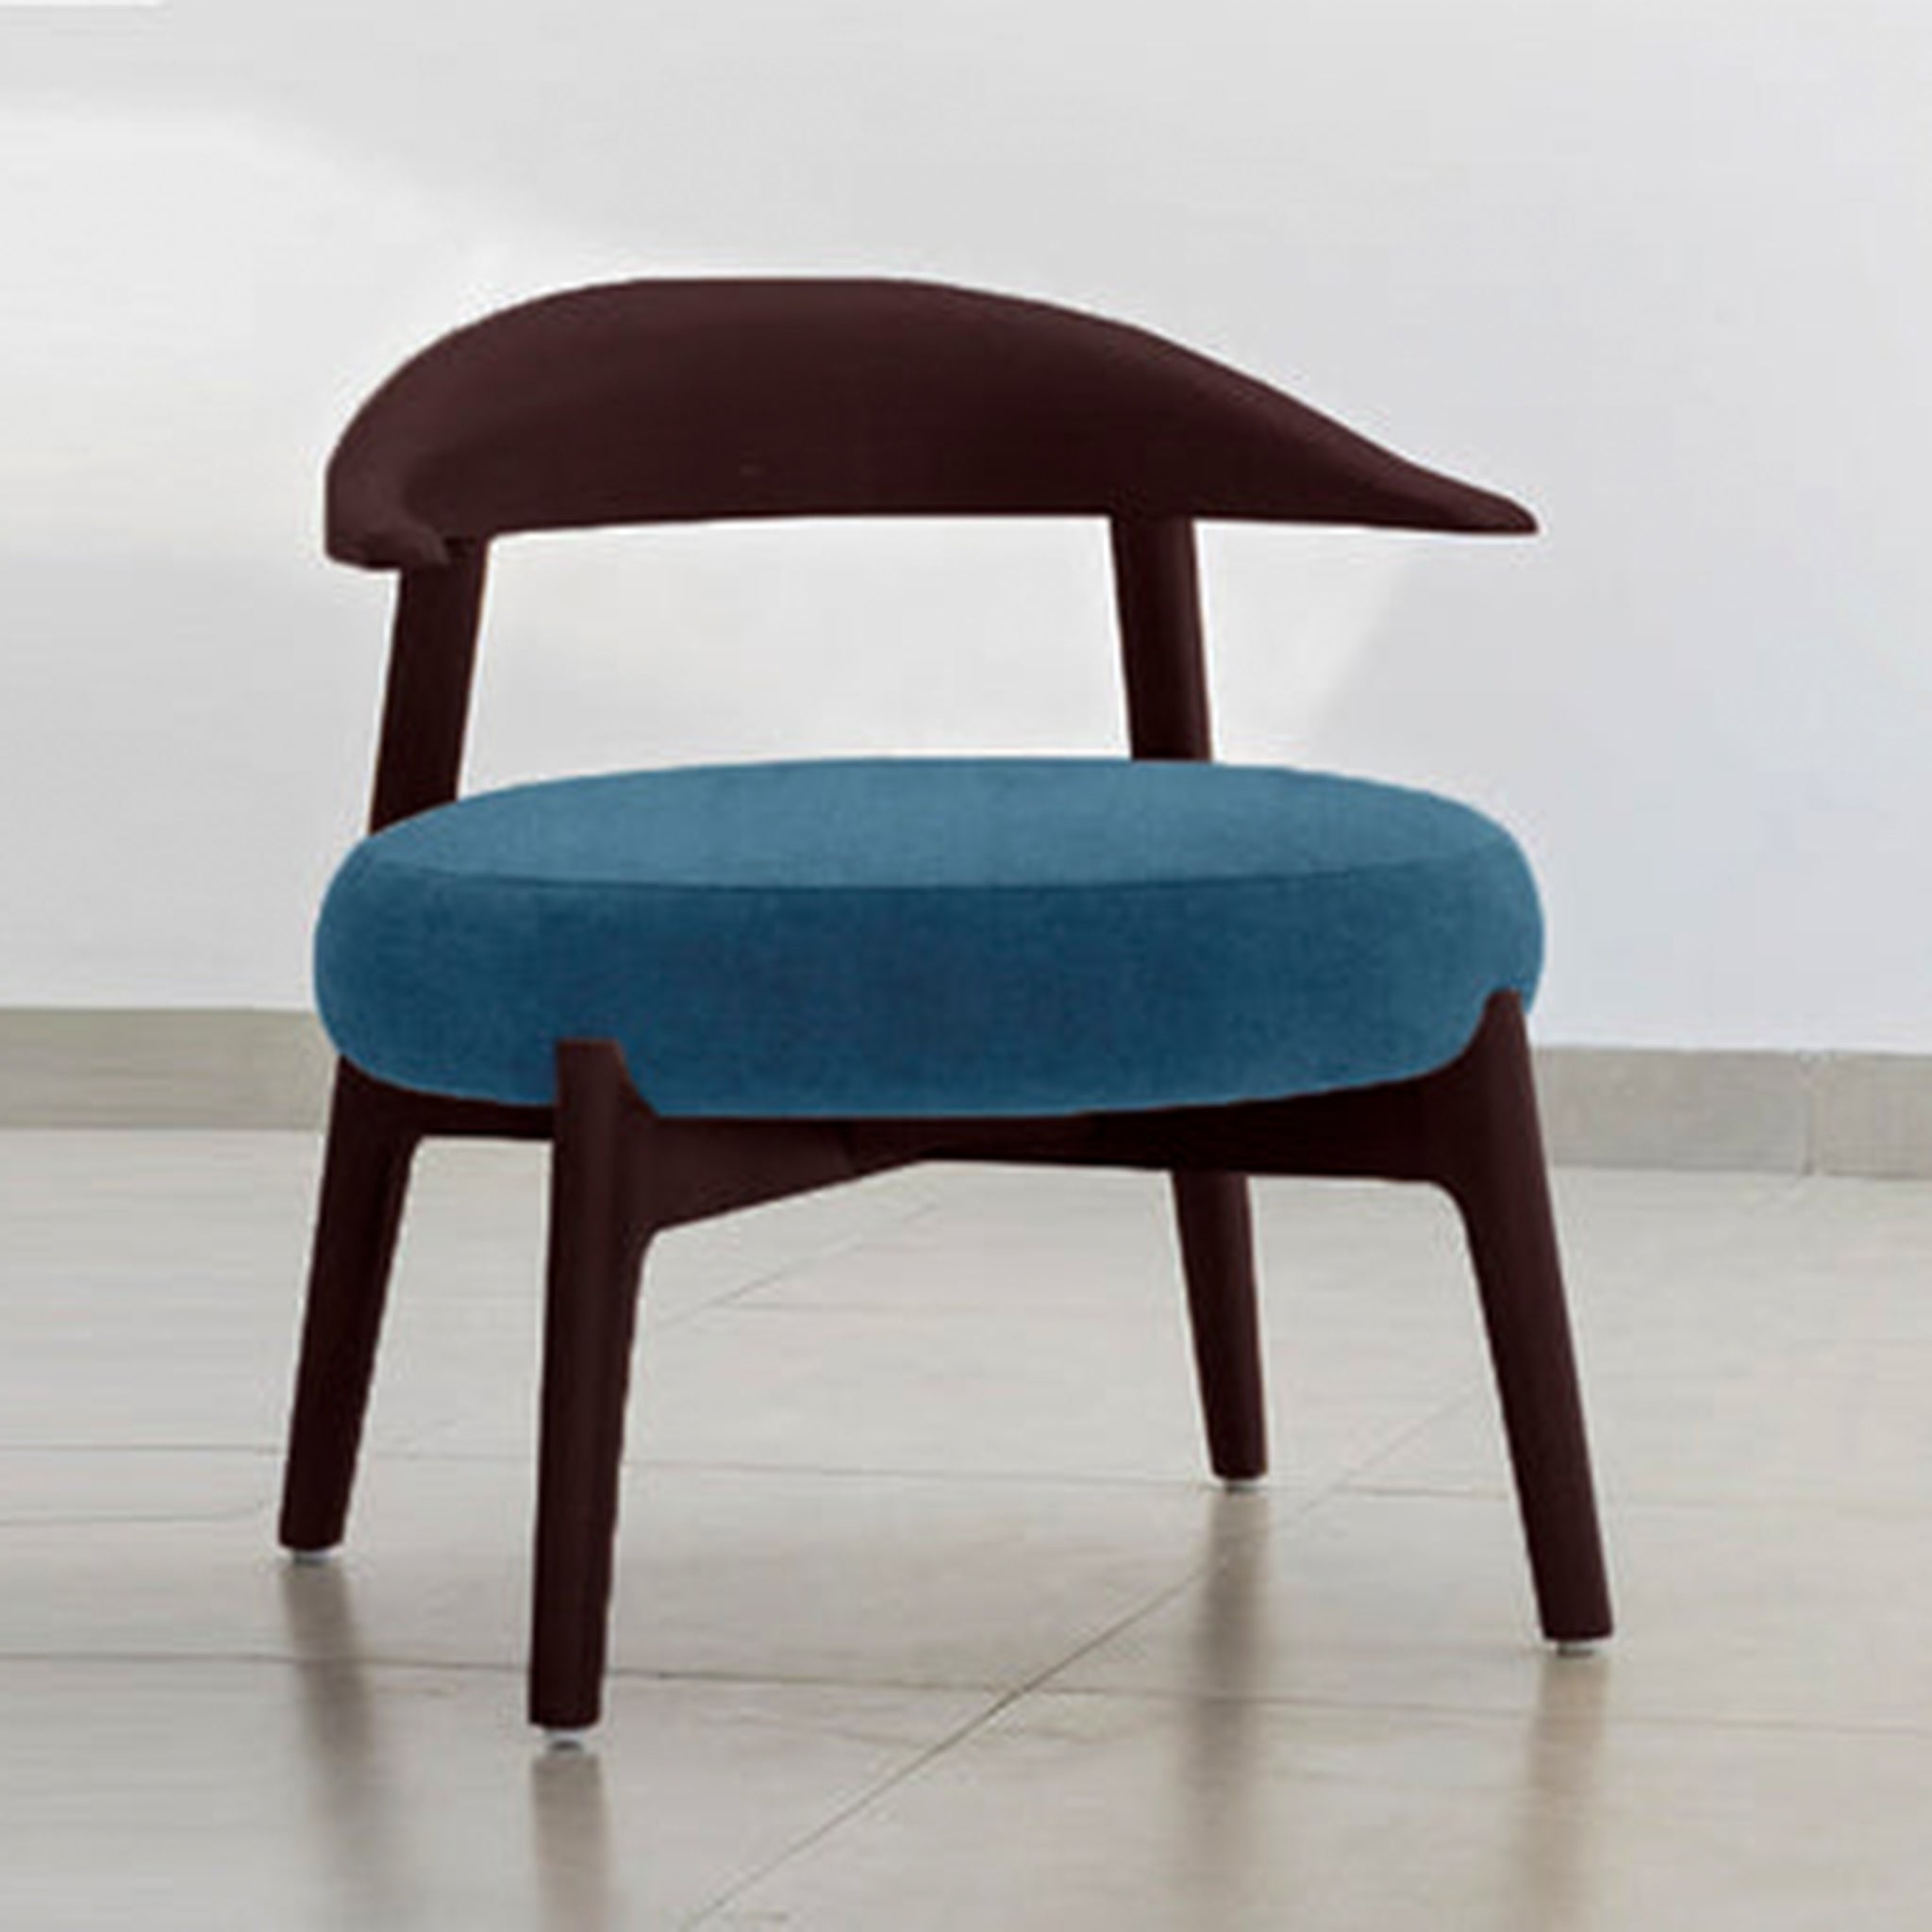 "The Hyde Accent Chair with unique wooden curves and comfortable fabric"